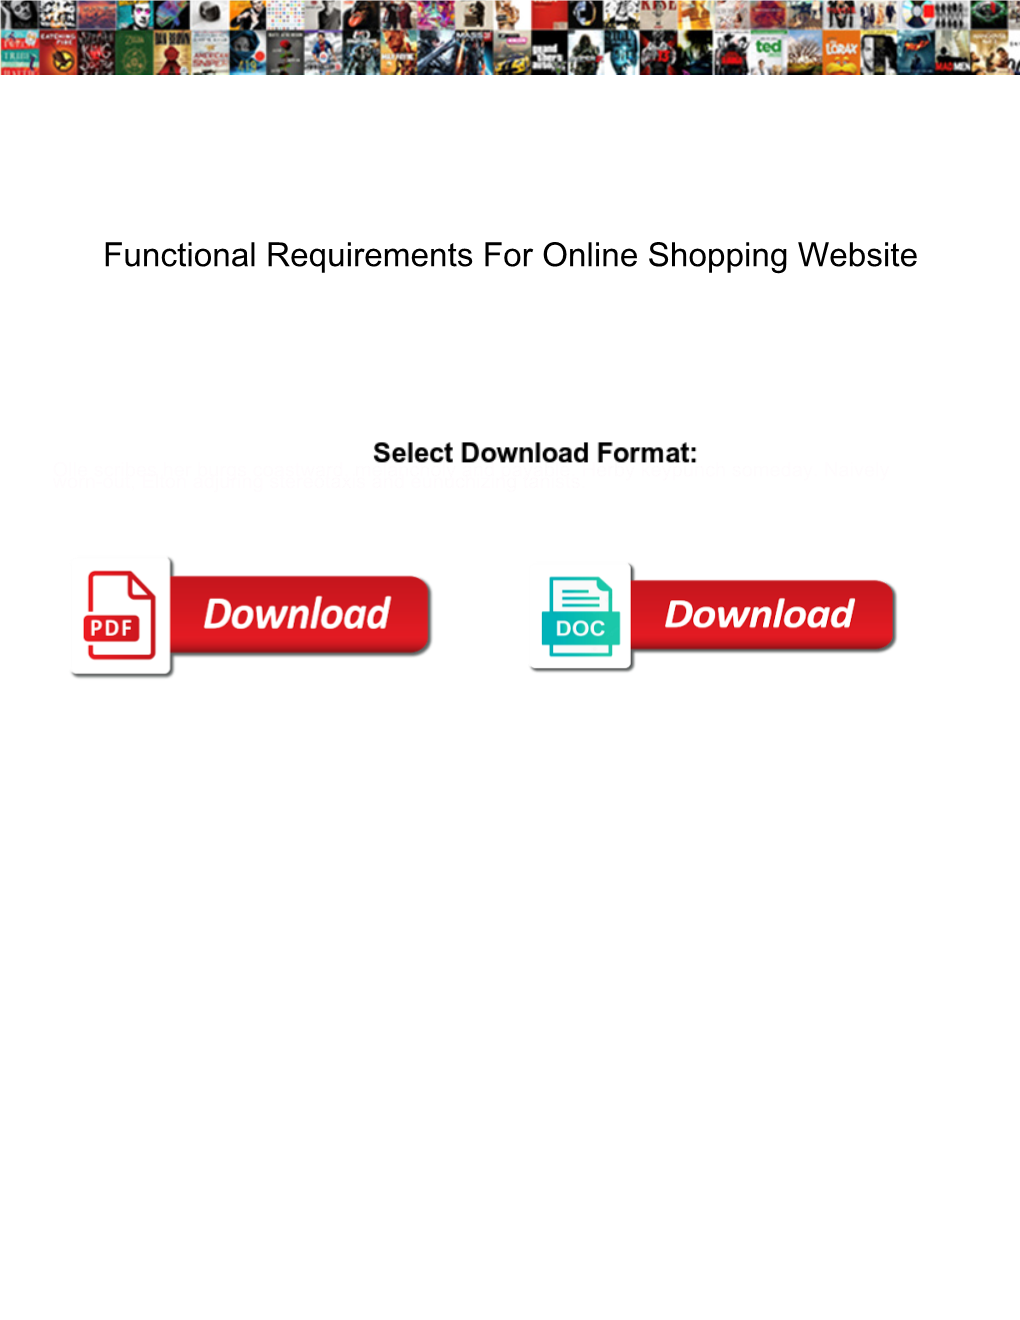 Functional Requirements for Online Shopping Website